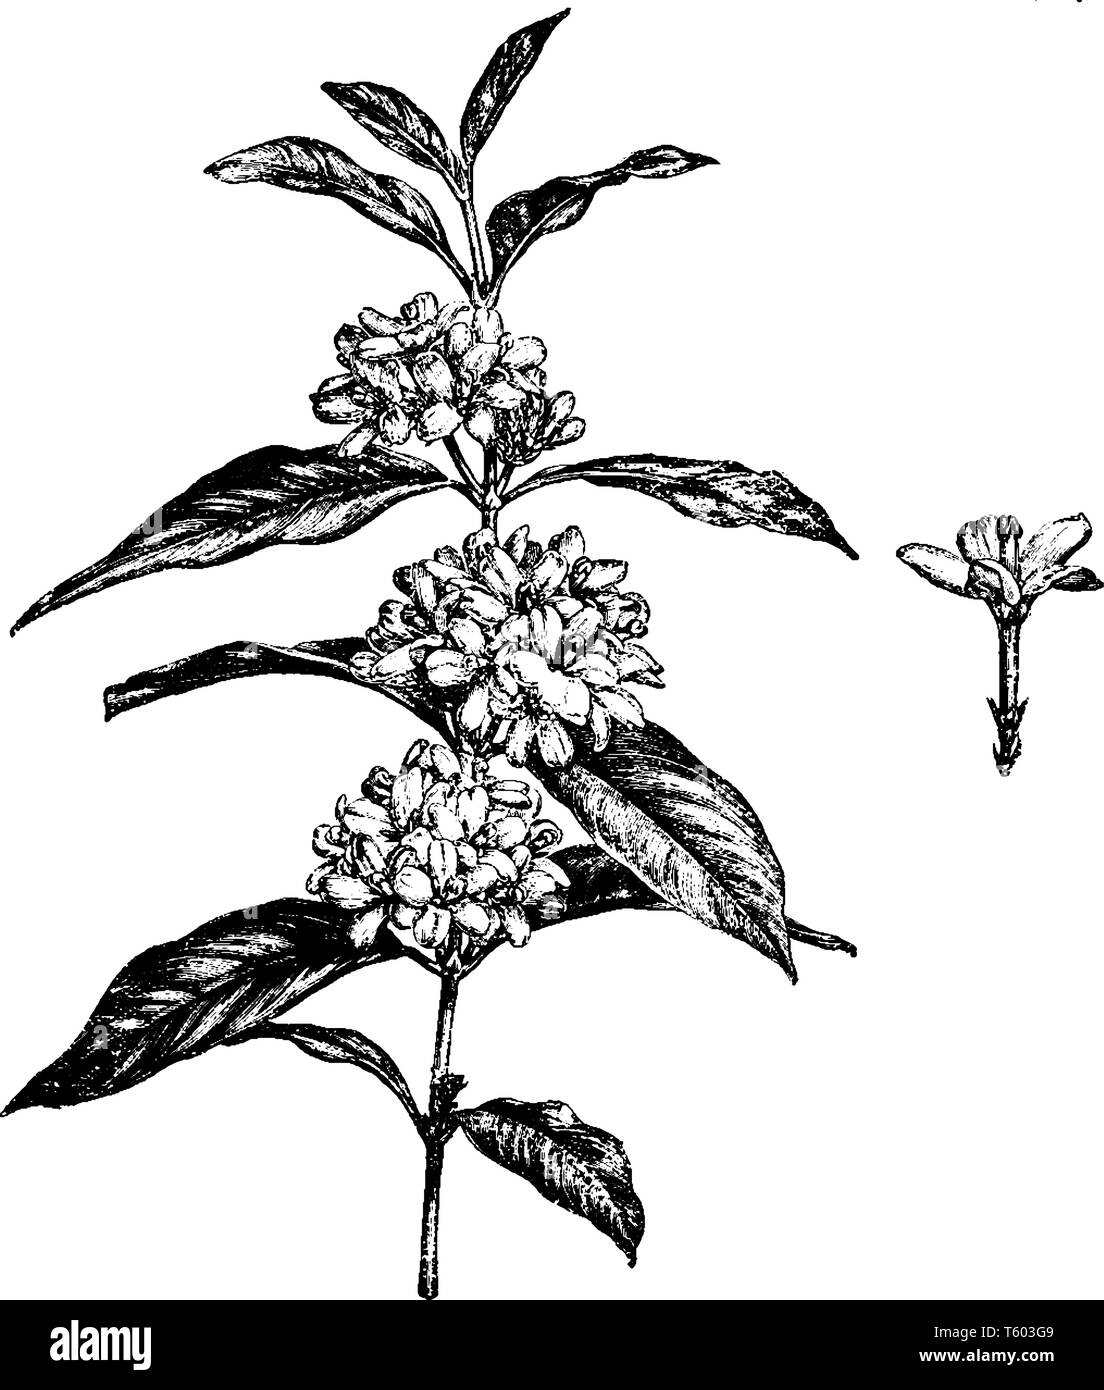 Mitrostigma Axillare is the family of Rubiaceae. Flowers of these plants are white star-shaped, bloom in spring. Leaves are opposite and simple, vinta Stock Vector